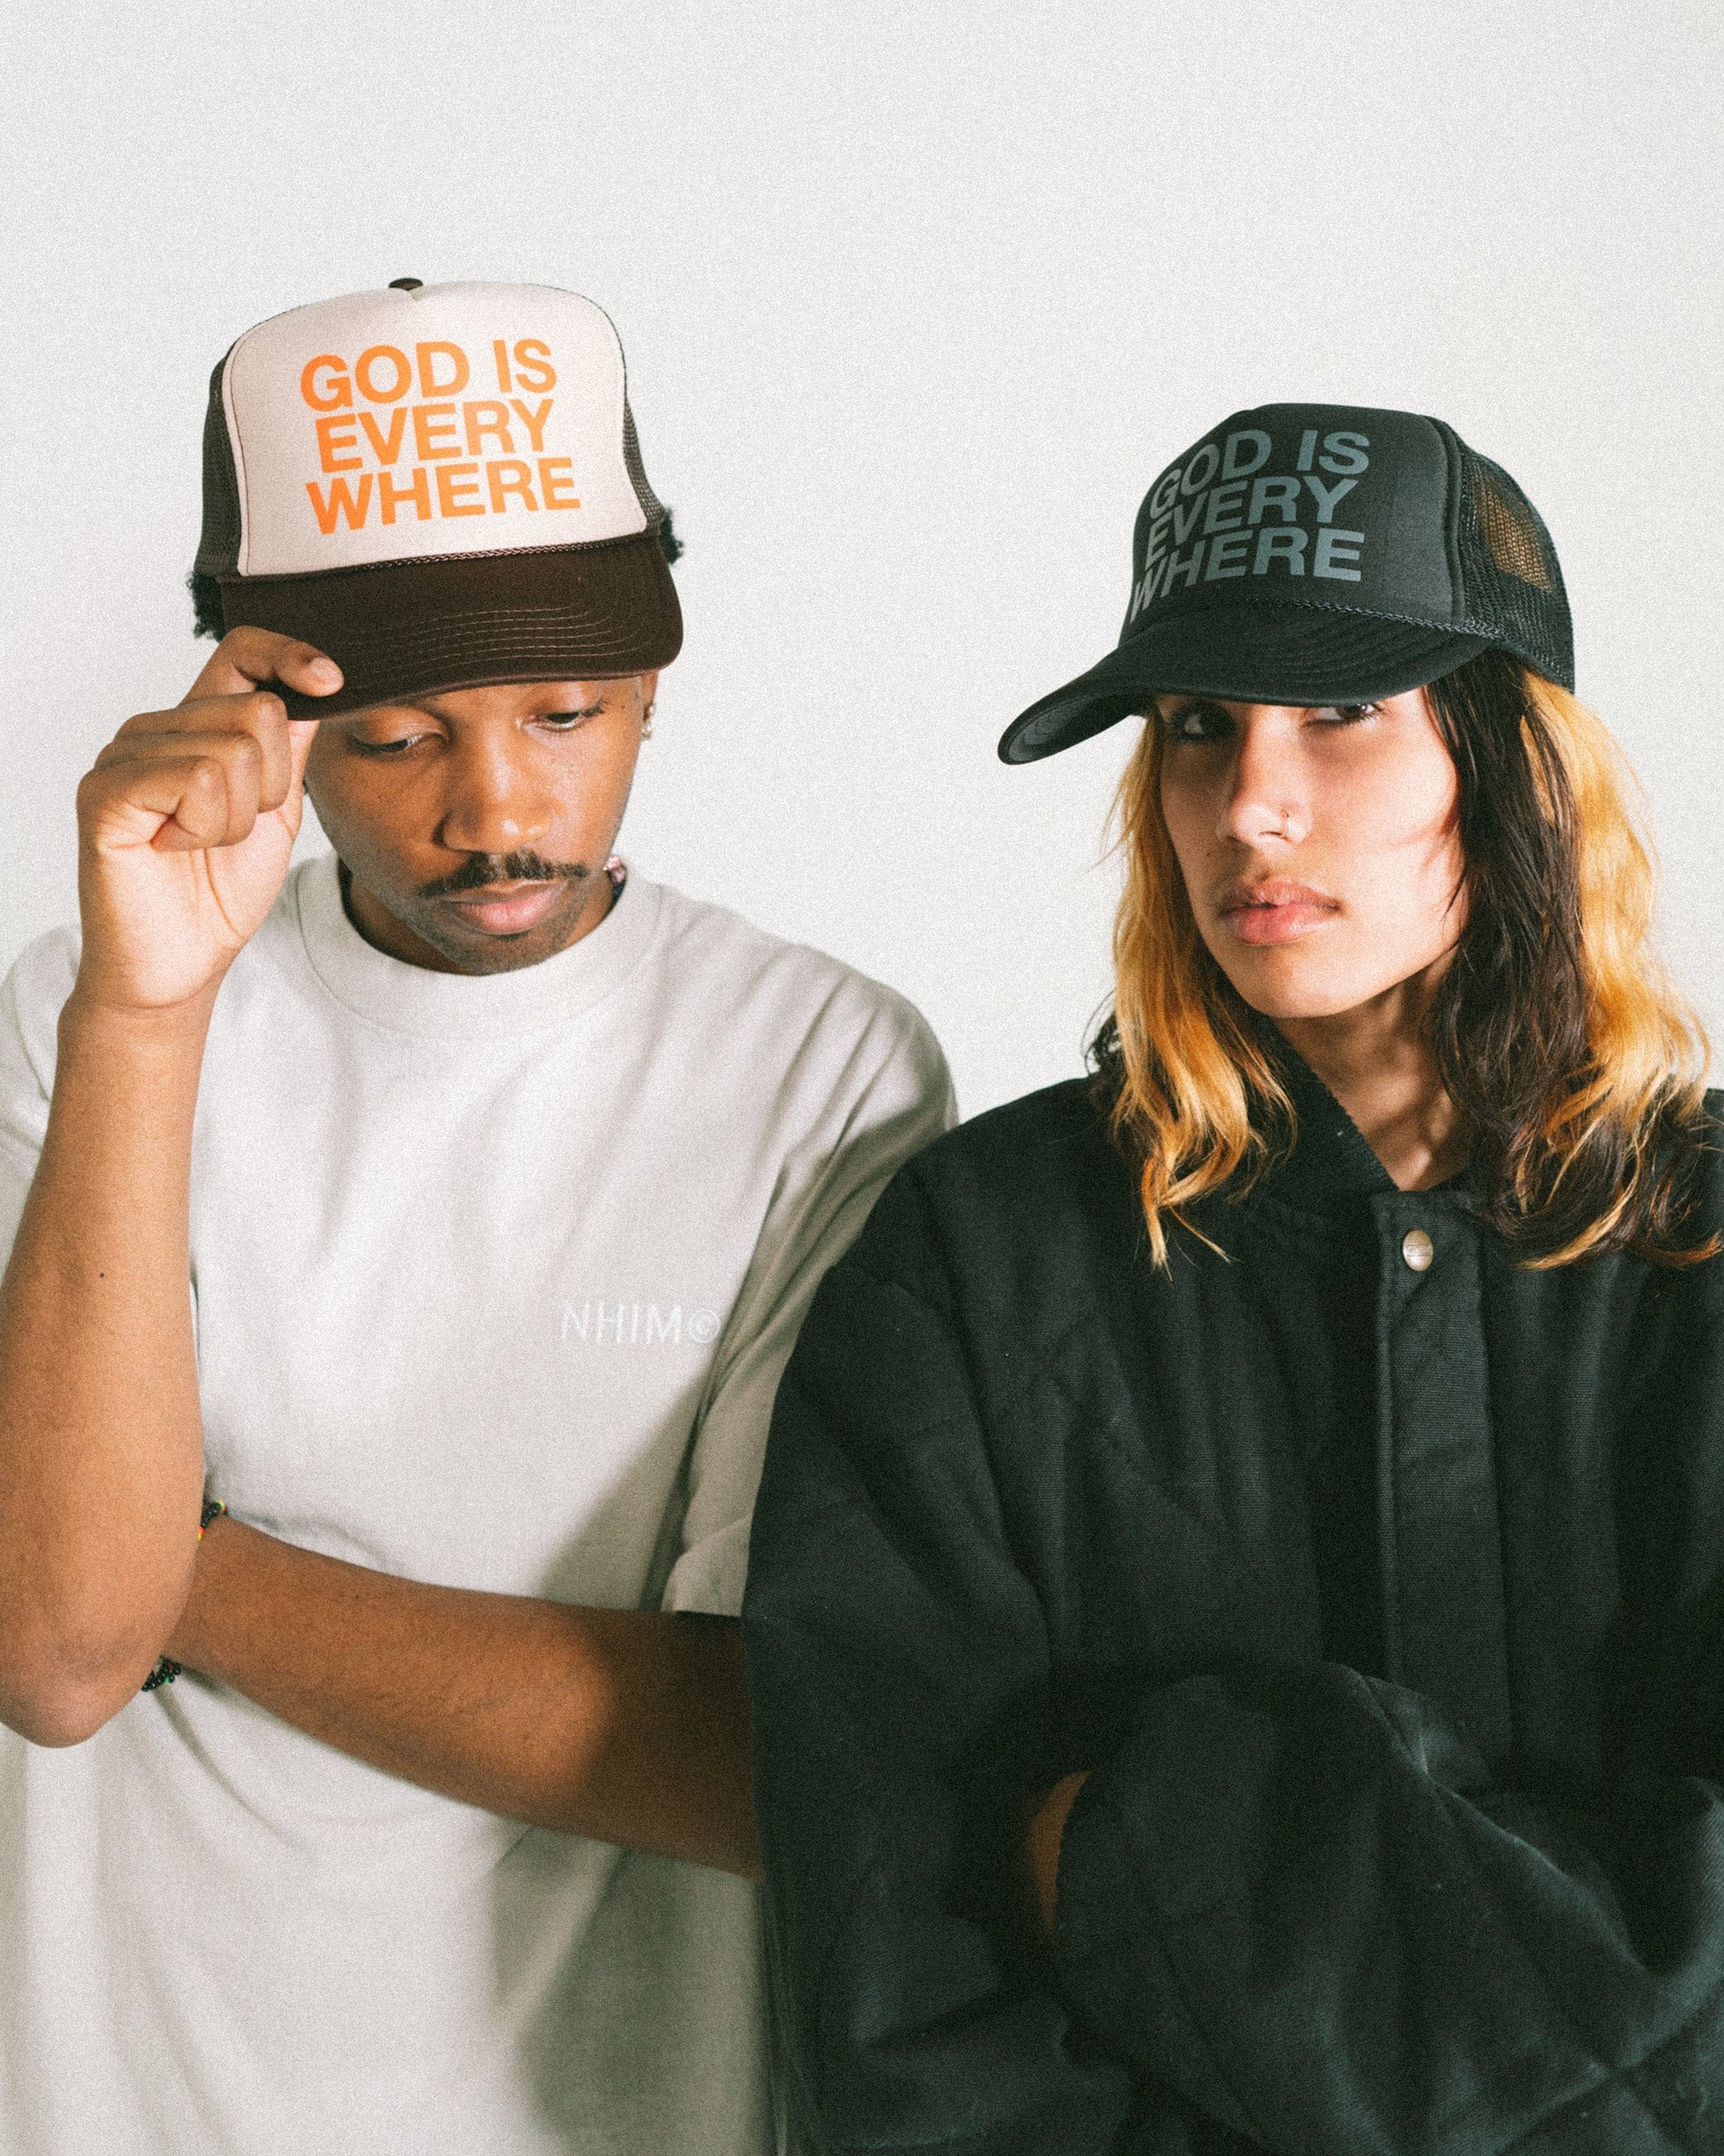 GOD IS EVERYWHERE Trucker hat brown and tan with orange writing AND black hat with grey writing. Two models standing next to each other. Christian hat by NHIM APPAREL